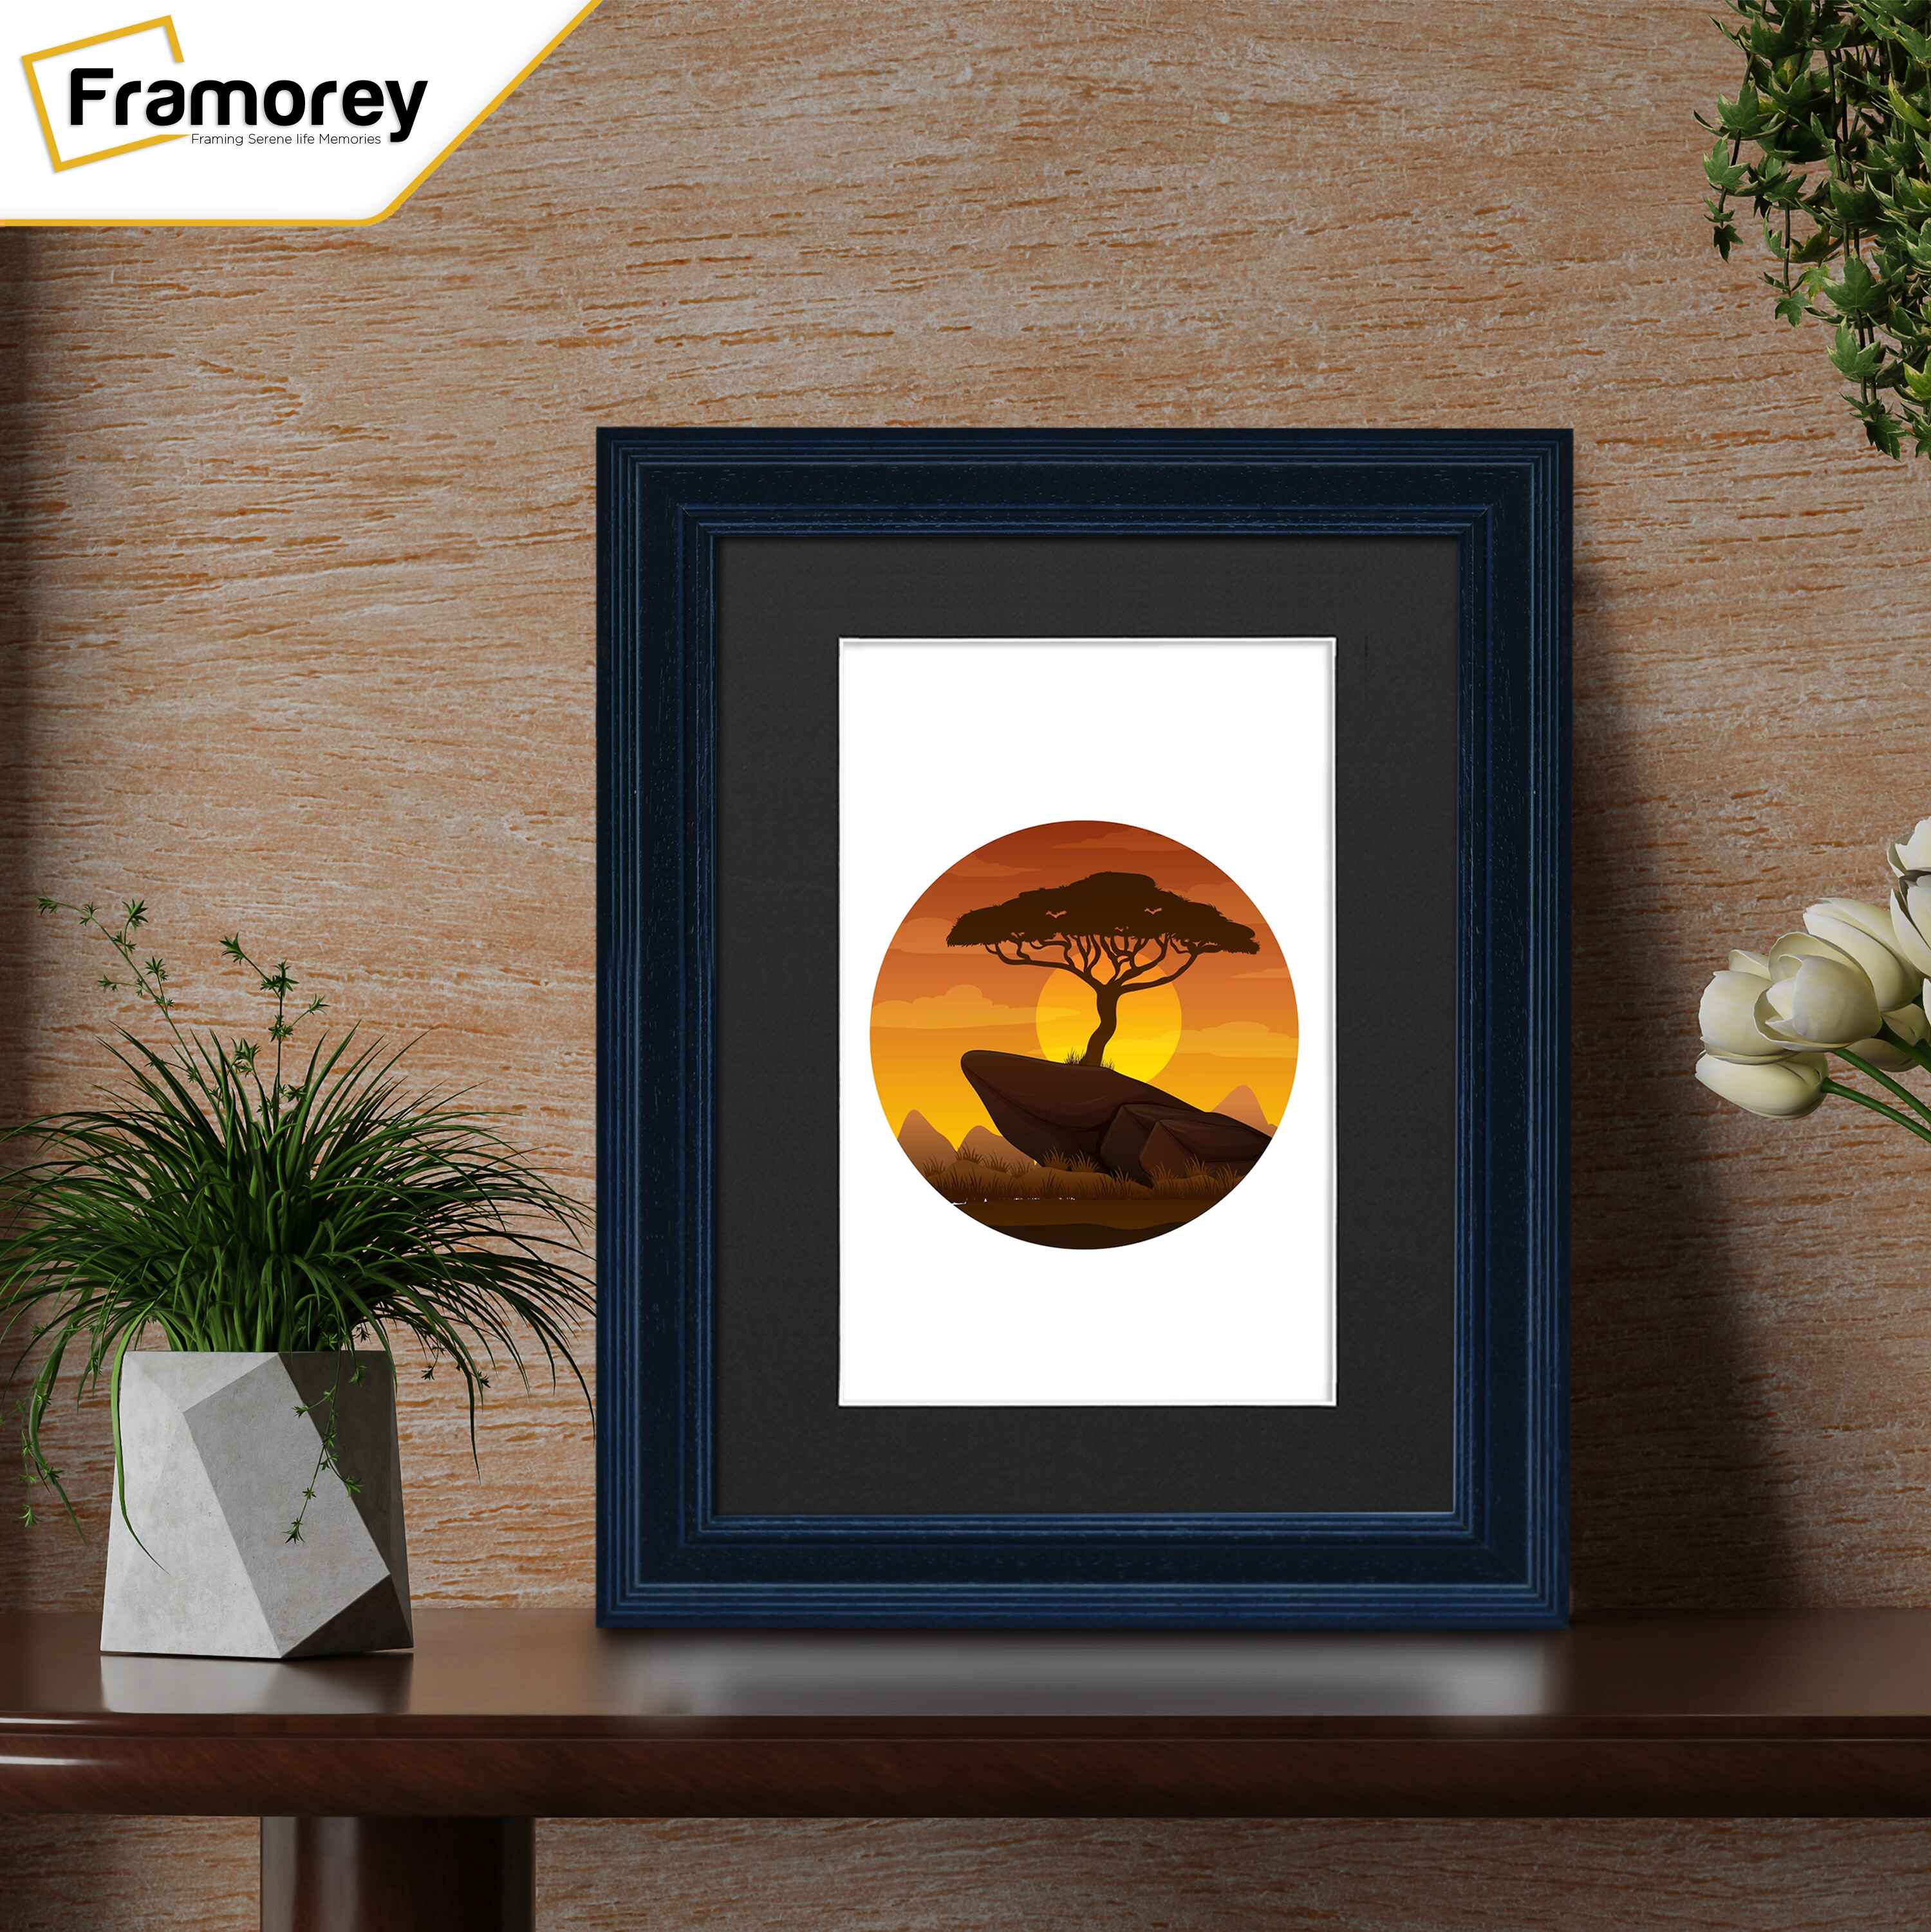 Grained Black Picture Frame Fletcher Wood Wall Art Frame With Black Mount